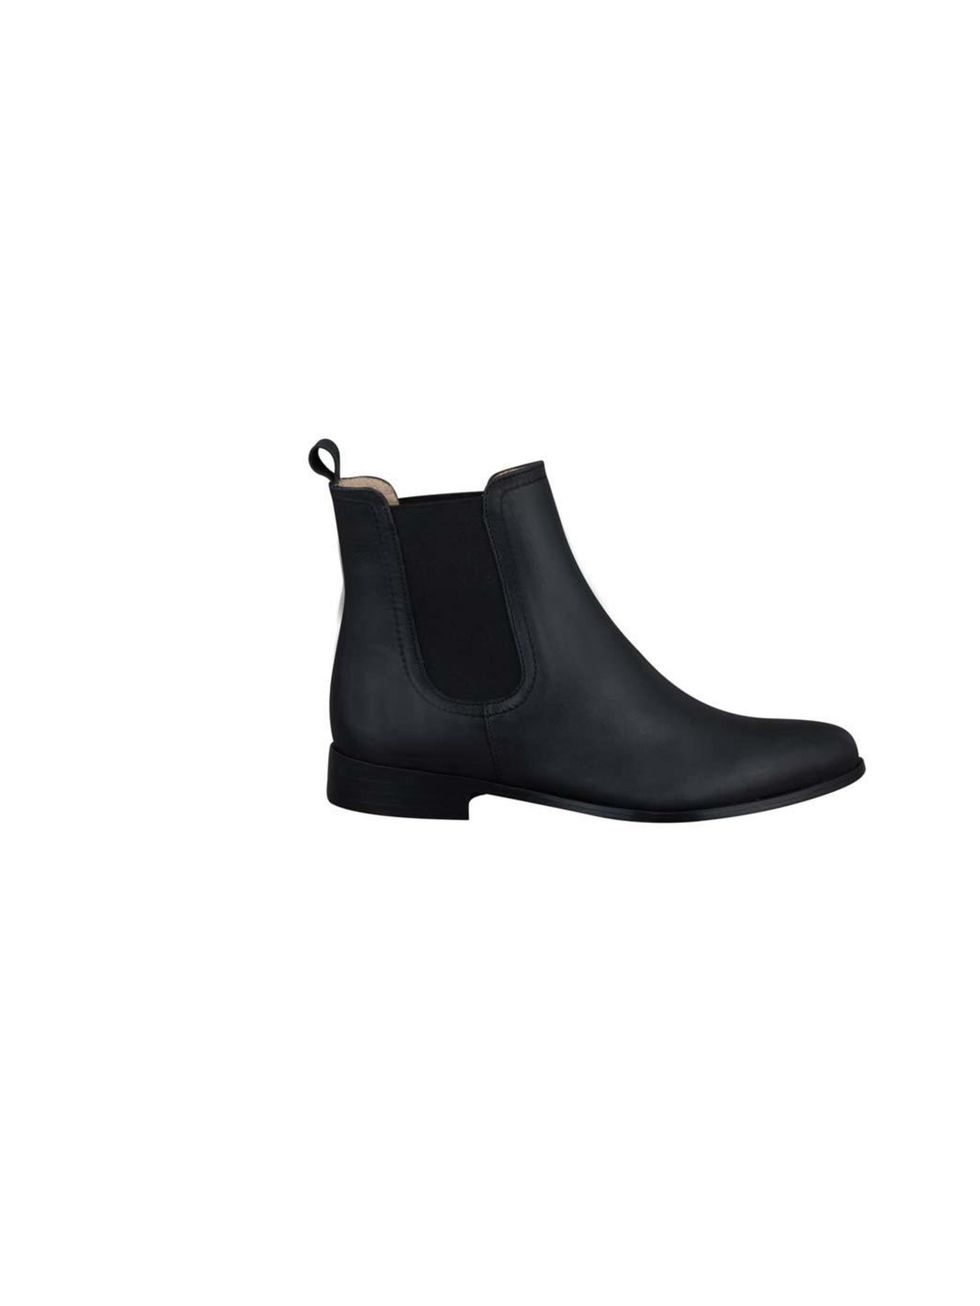 <p>A great staple boot that will go with most of the things that I own!</p><p>- Lisa Rahman, Deputy Art Director</p><p><a href="http://www.duoboots.com/ankle-boots/black-leather/brando/d/">Duo</a> boots, £110</p>